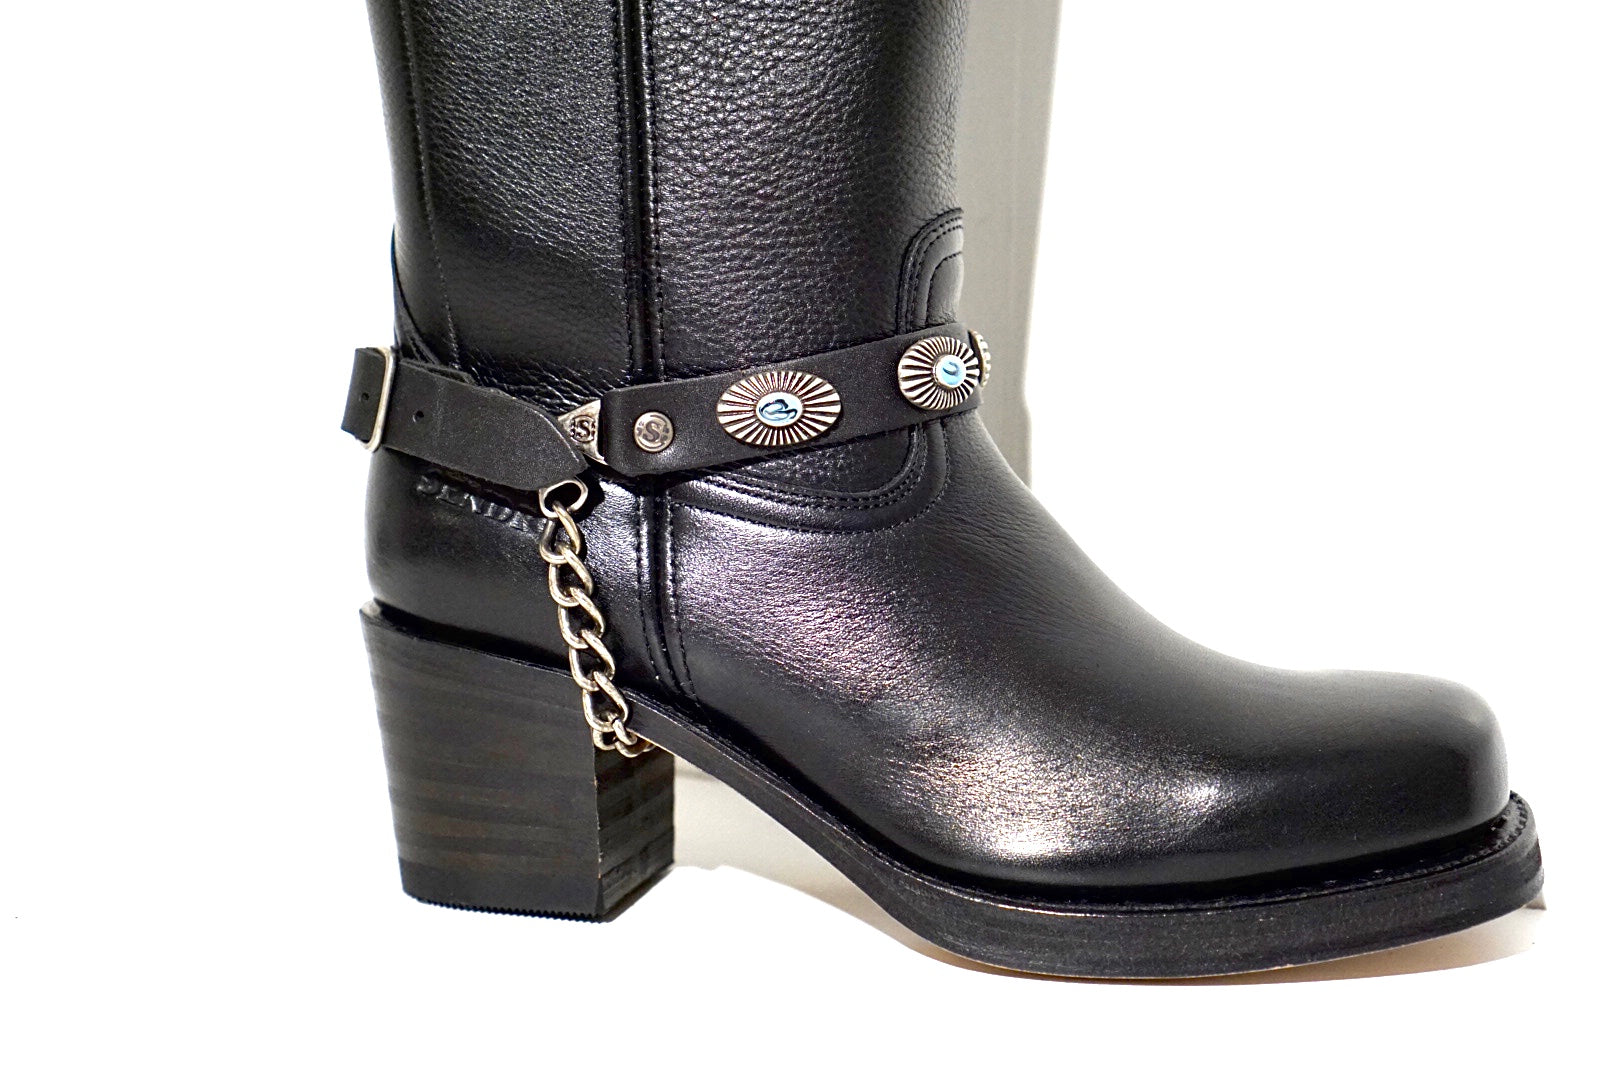 Sendra spurs - black with turquoise accents